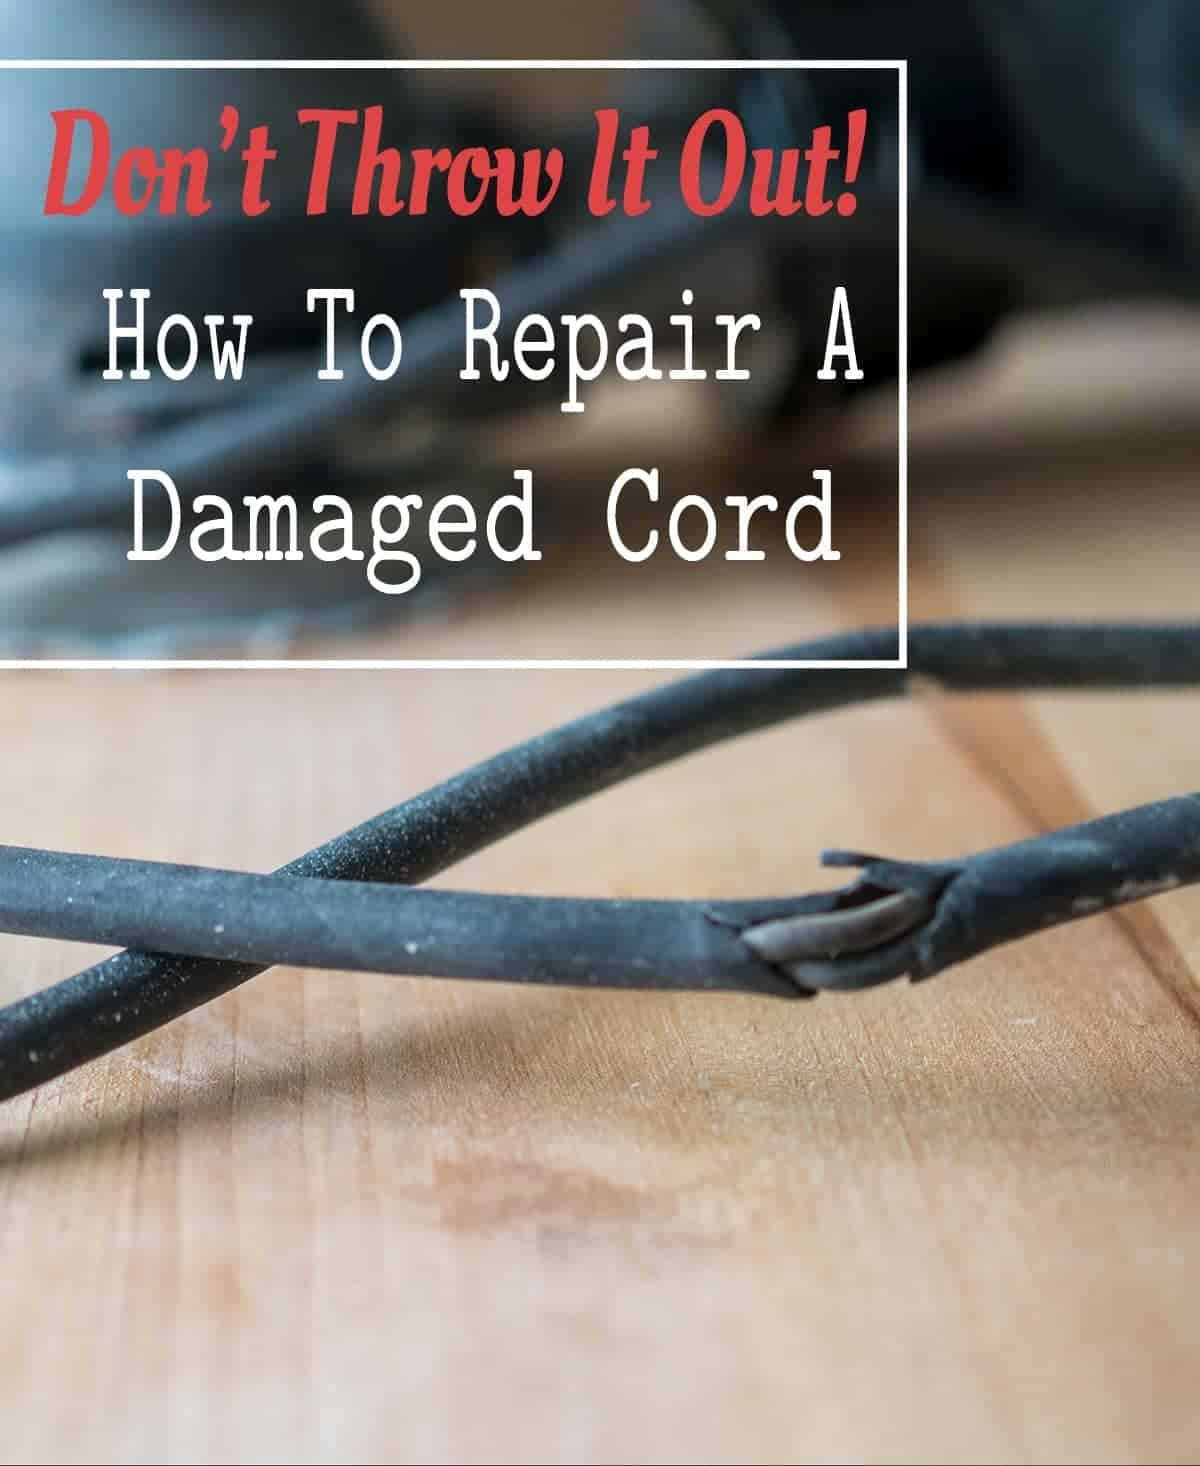 DIY Electrical cord repair with broken black electrical cord and title image.